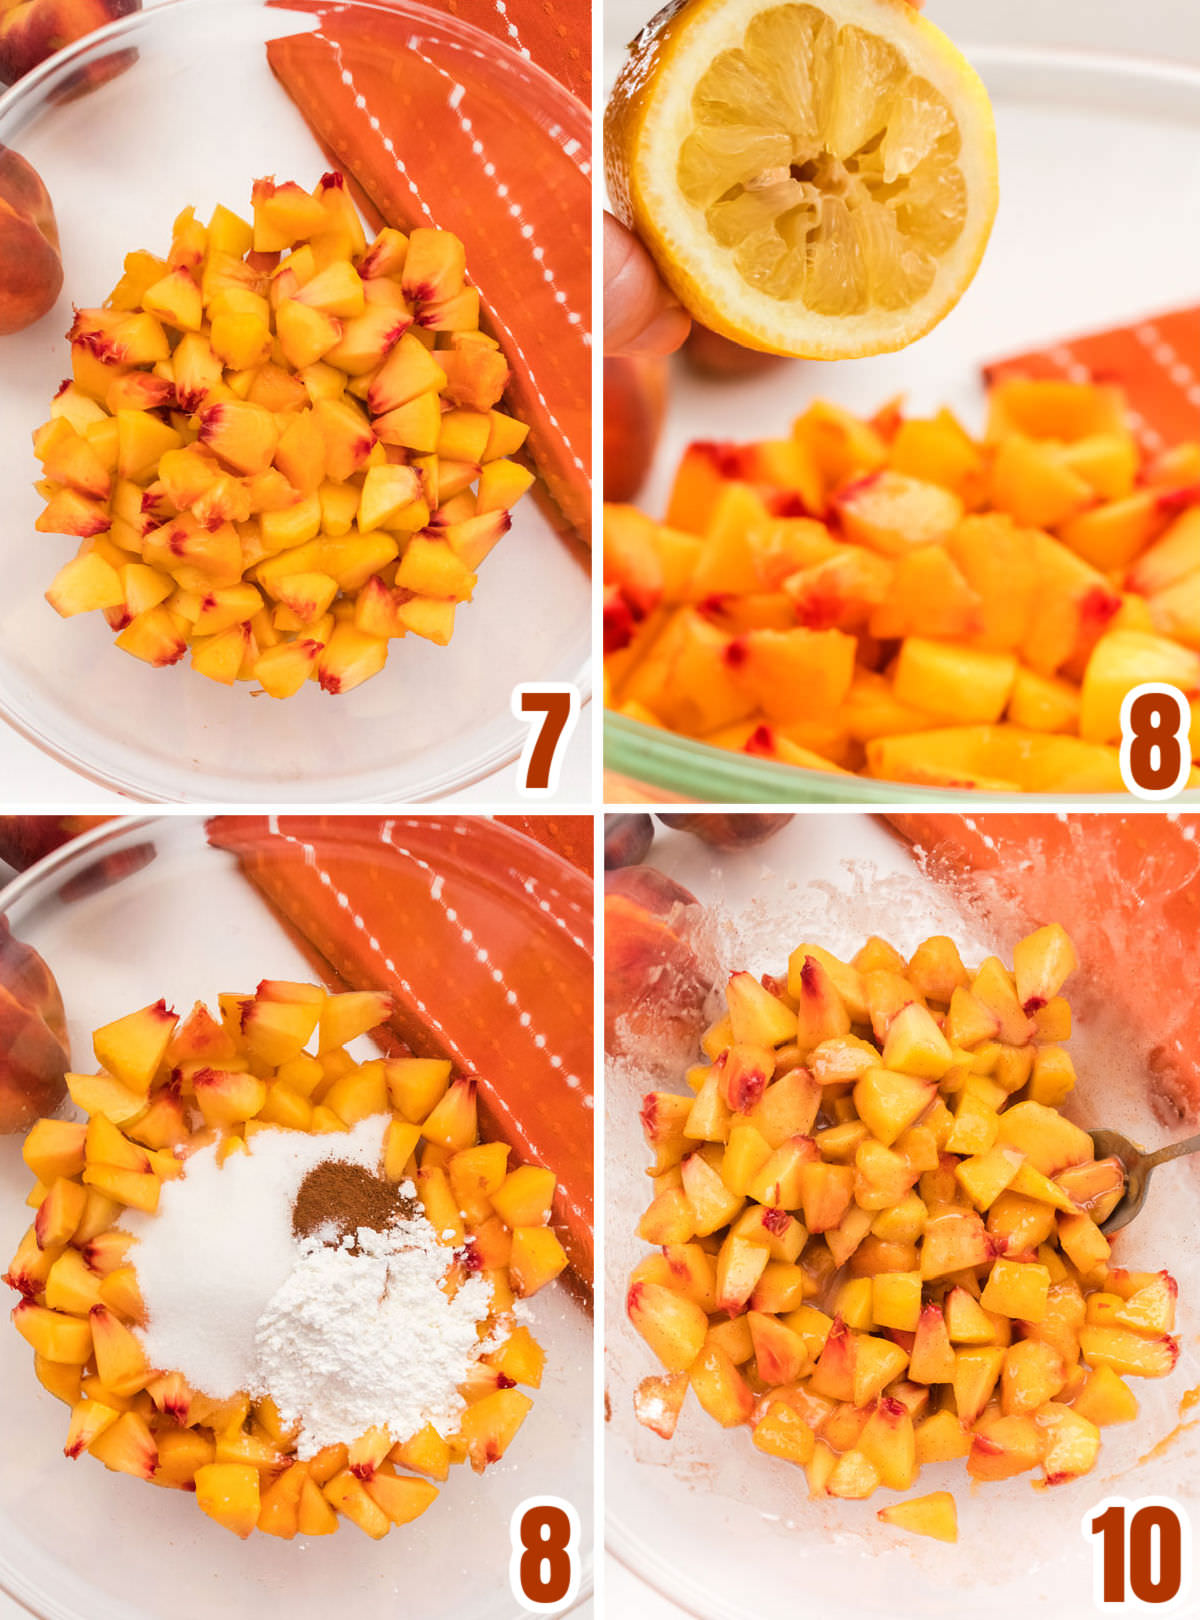 Collage image showing how to prepare the peach filling for the Crumble Bars.